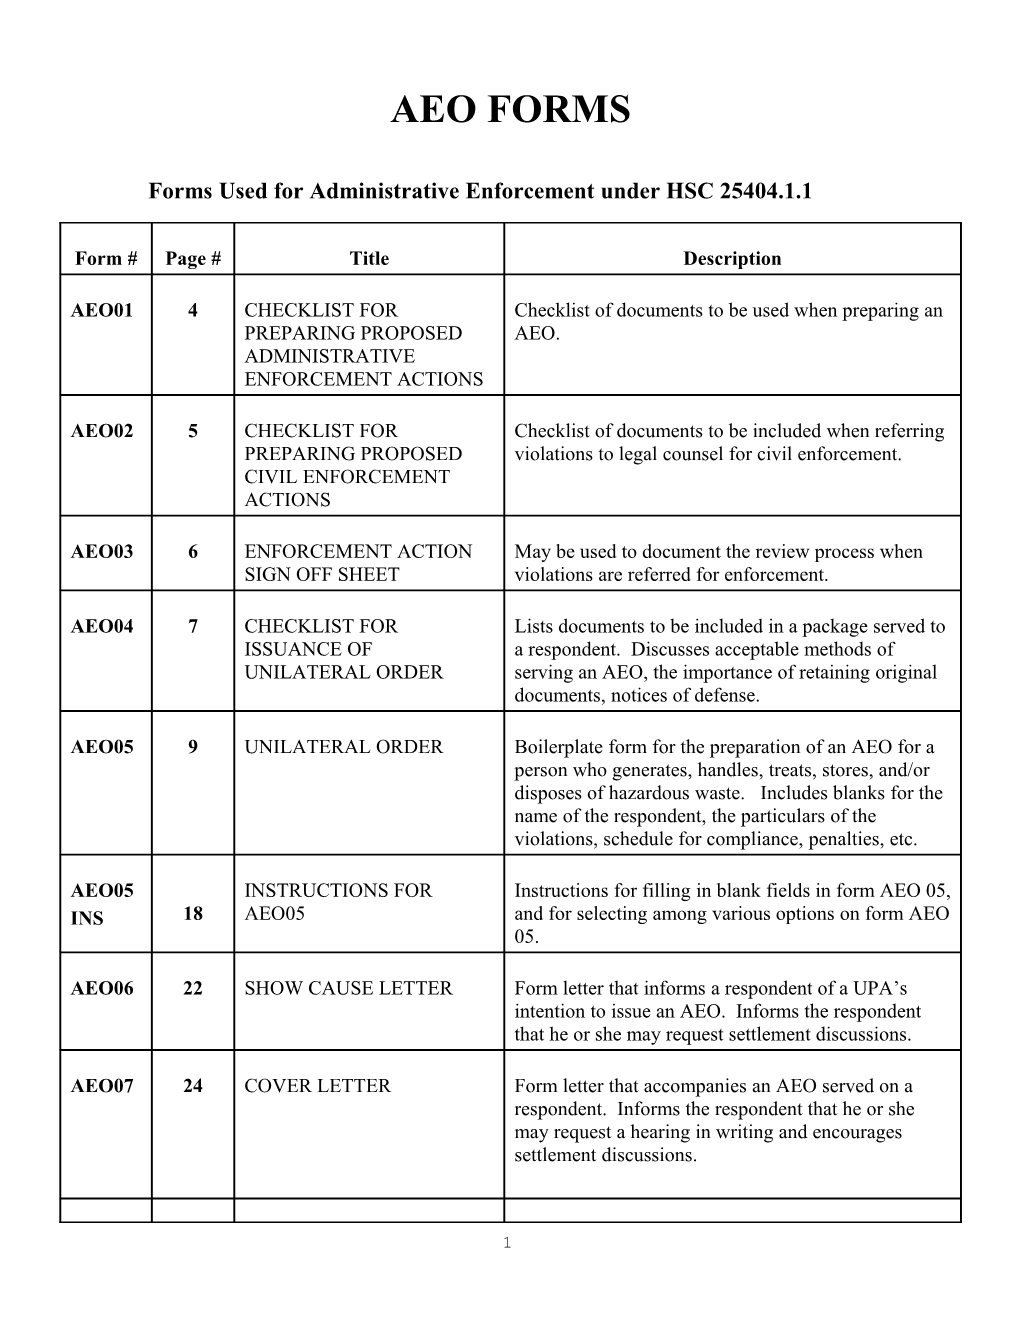 Forms Used for Administrative Enforcement Under HSC 25404.1.1